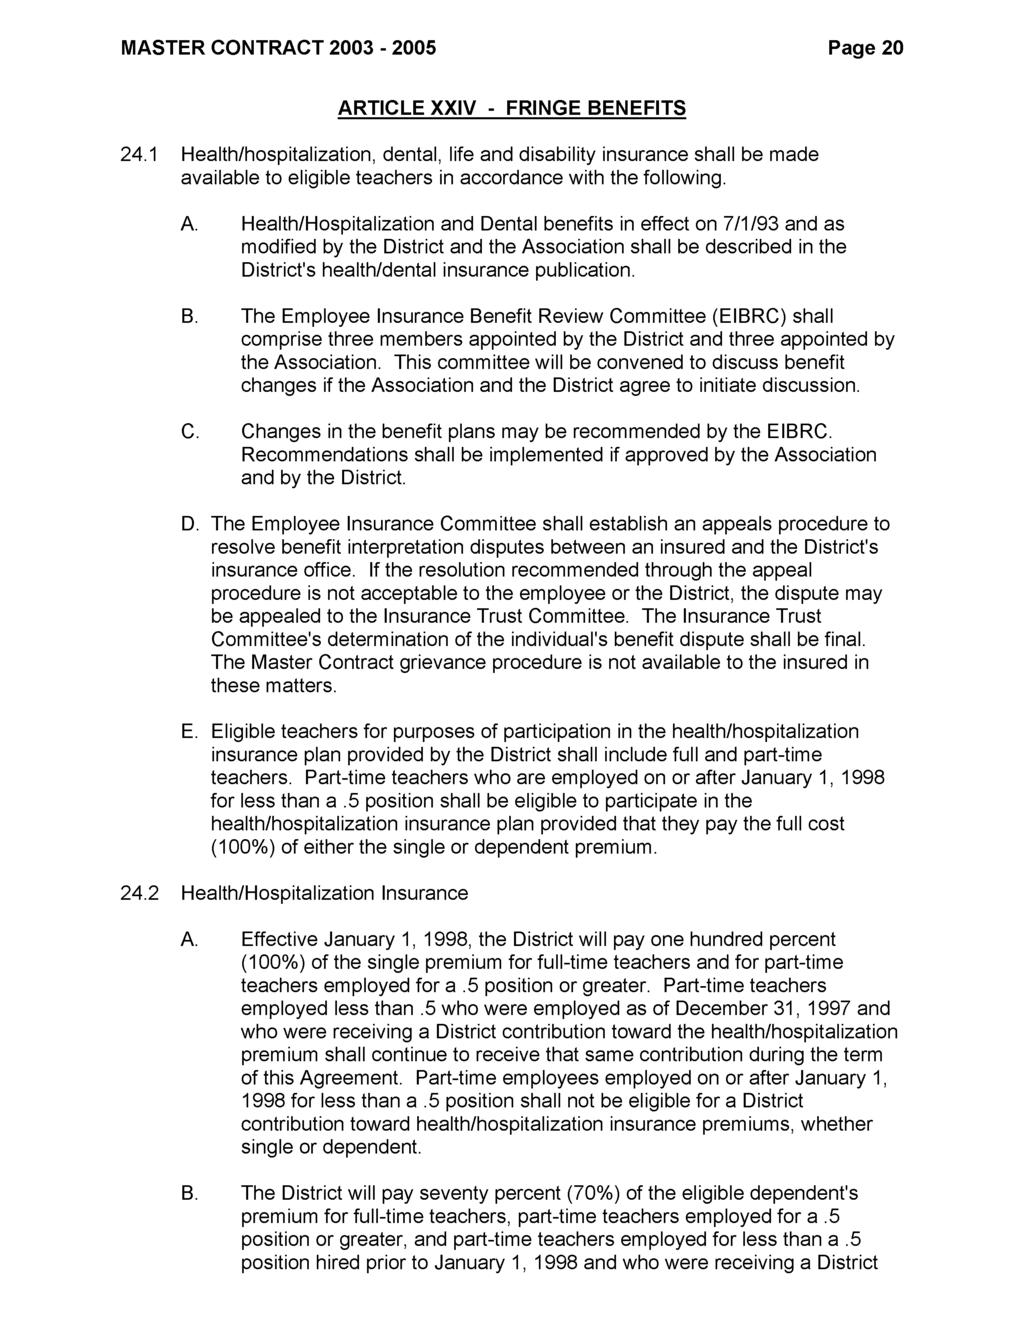 MASTER CONTRACT 2003-2005 Page 20 ARTICLE XXIV - FRINGE BENEFITS 24.